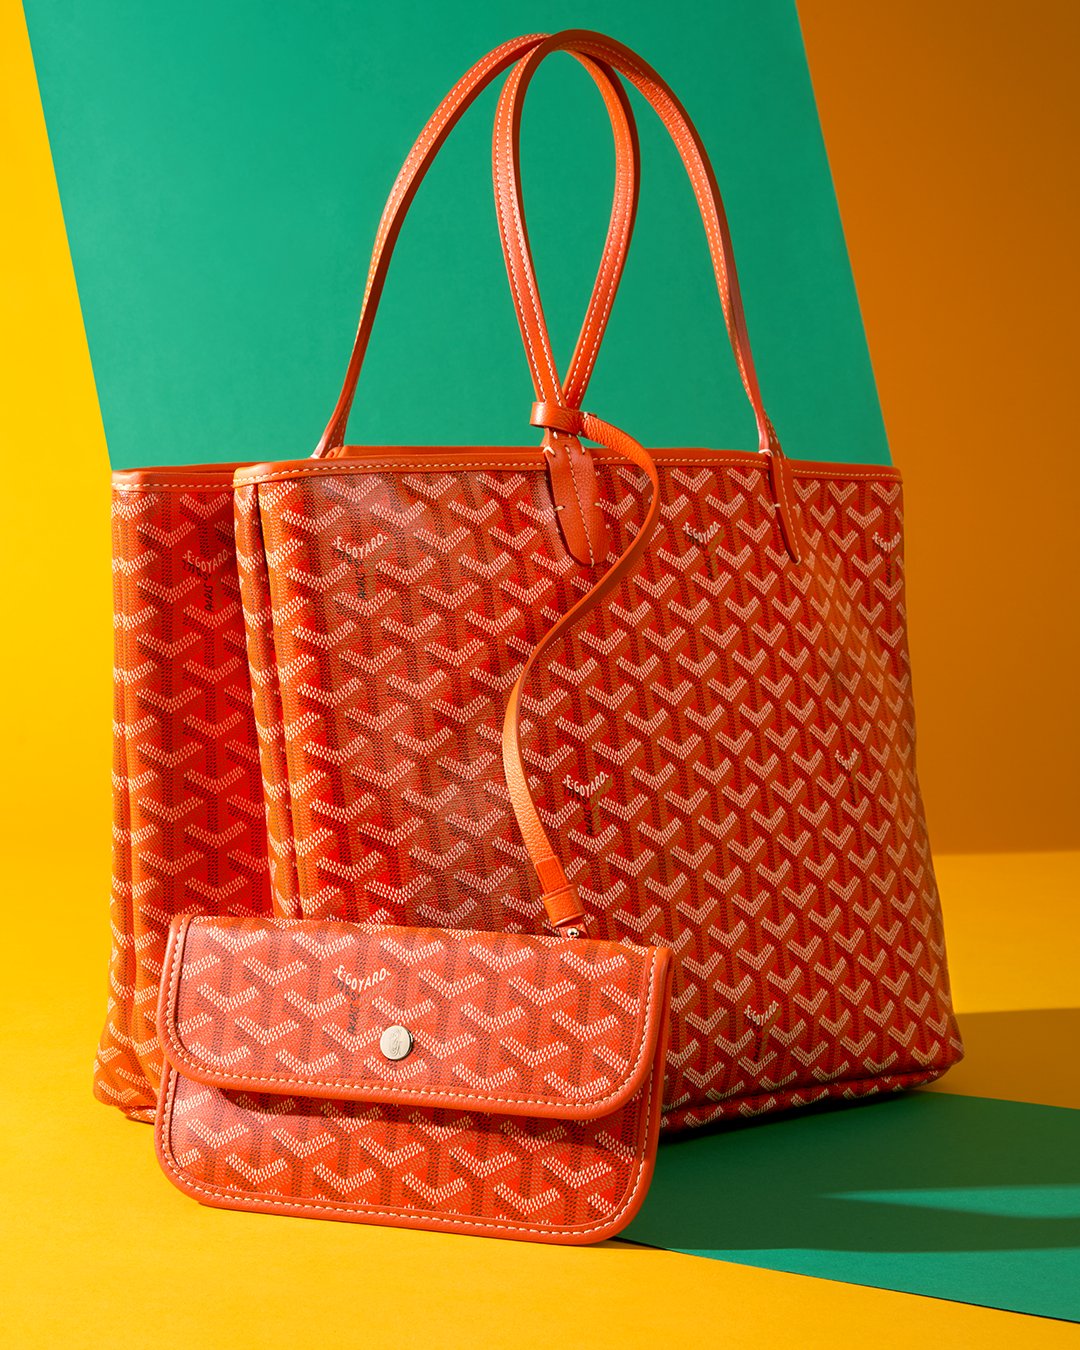 Goyard Red Isabelle PM Tote